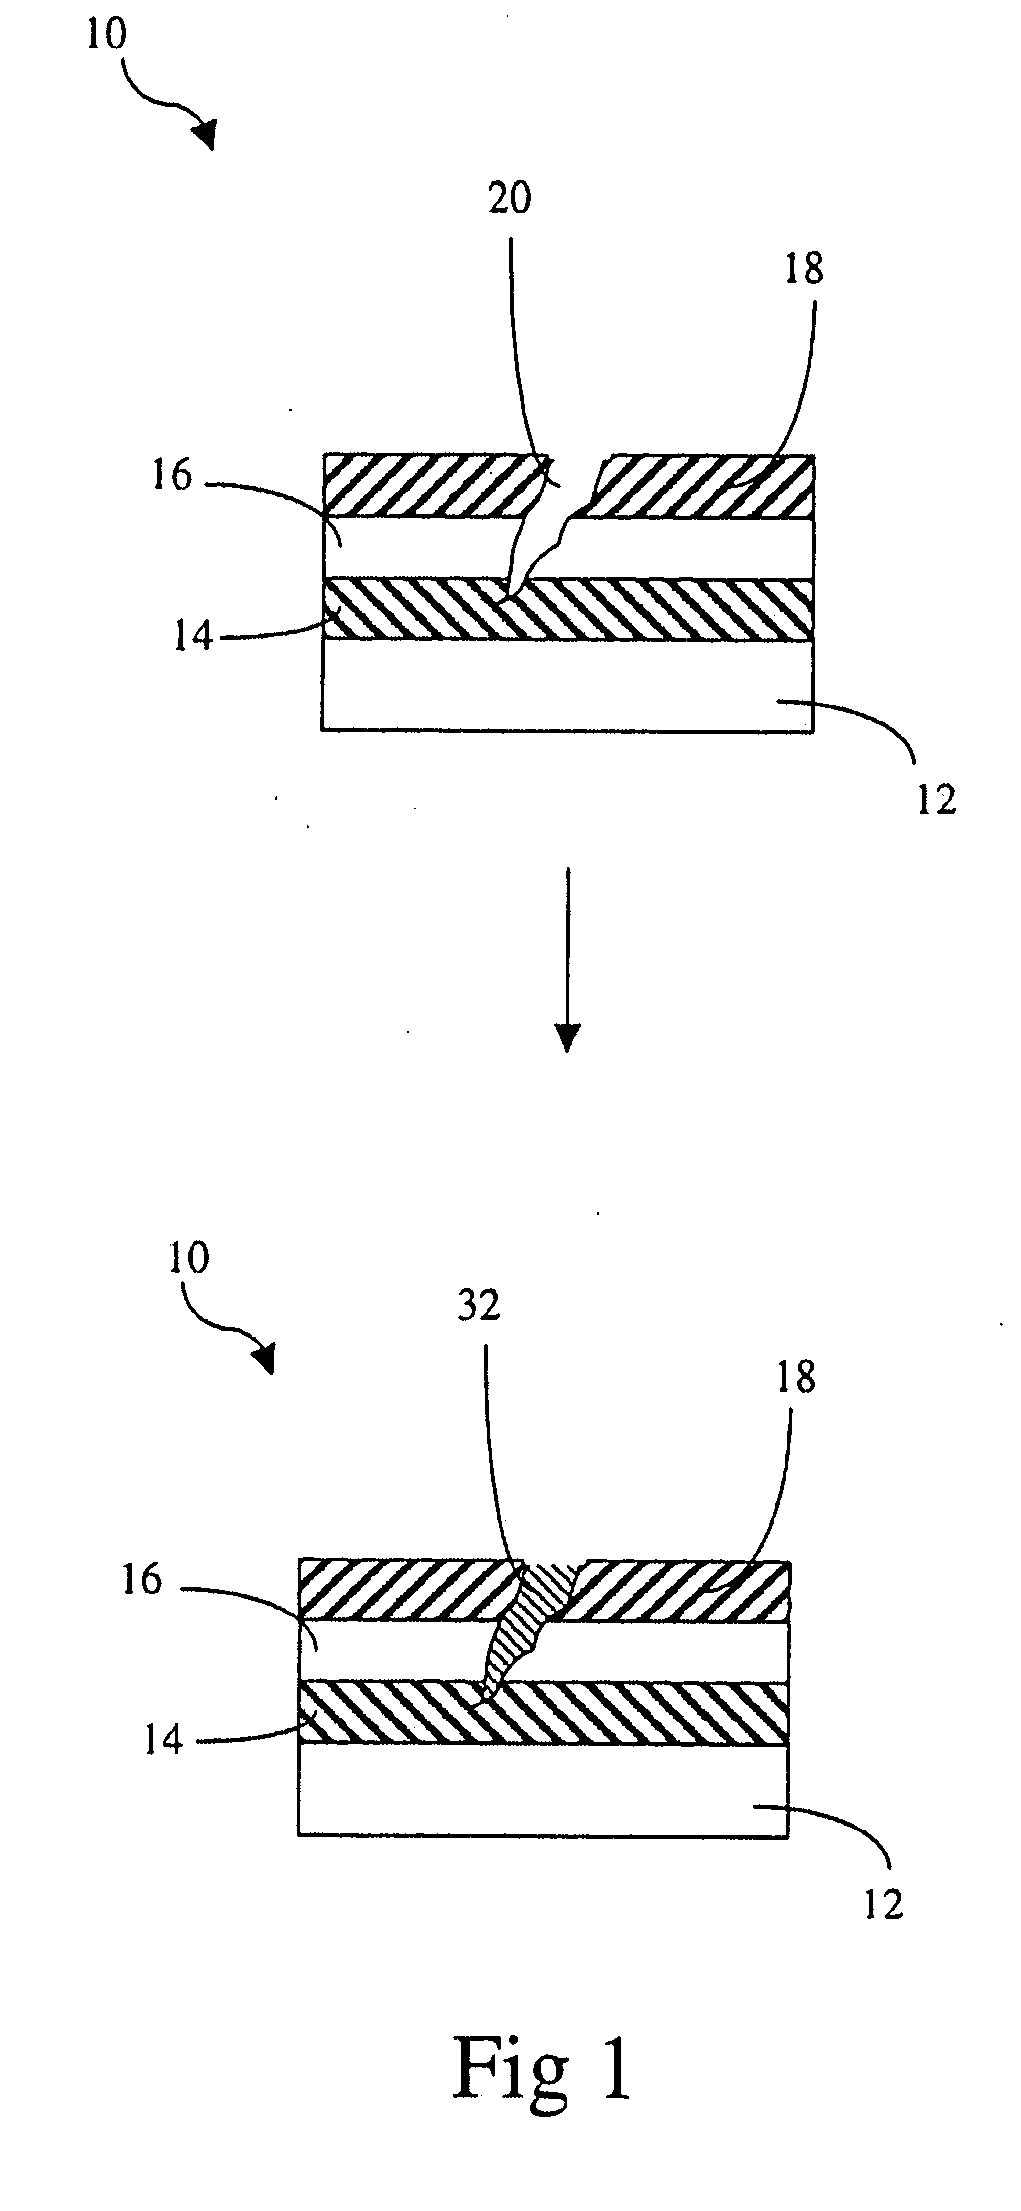 Method of treating a thermal barrier coating and related articles